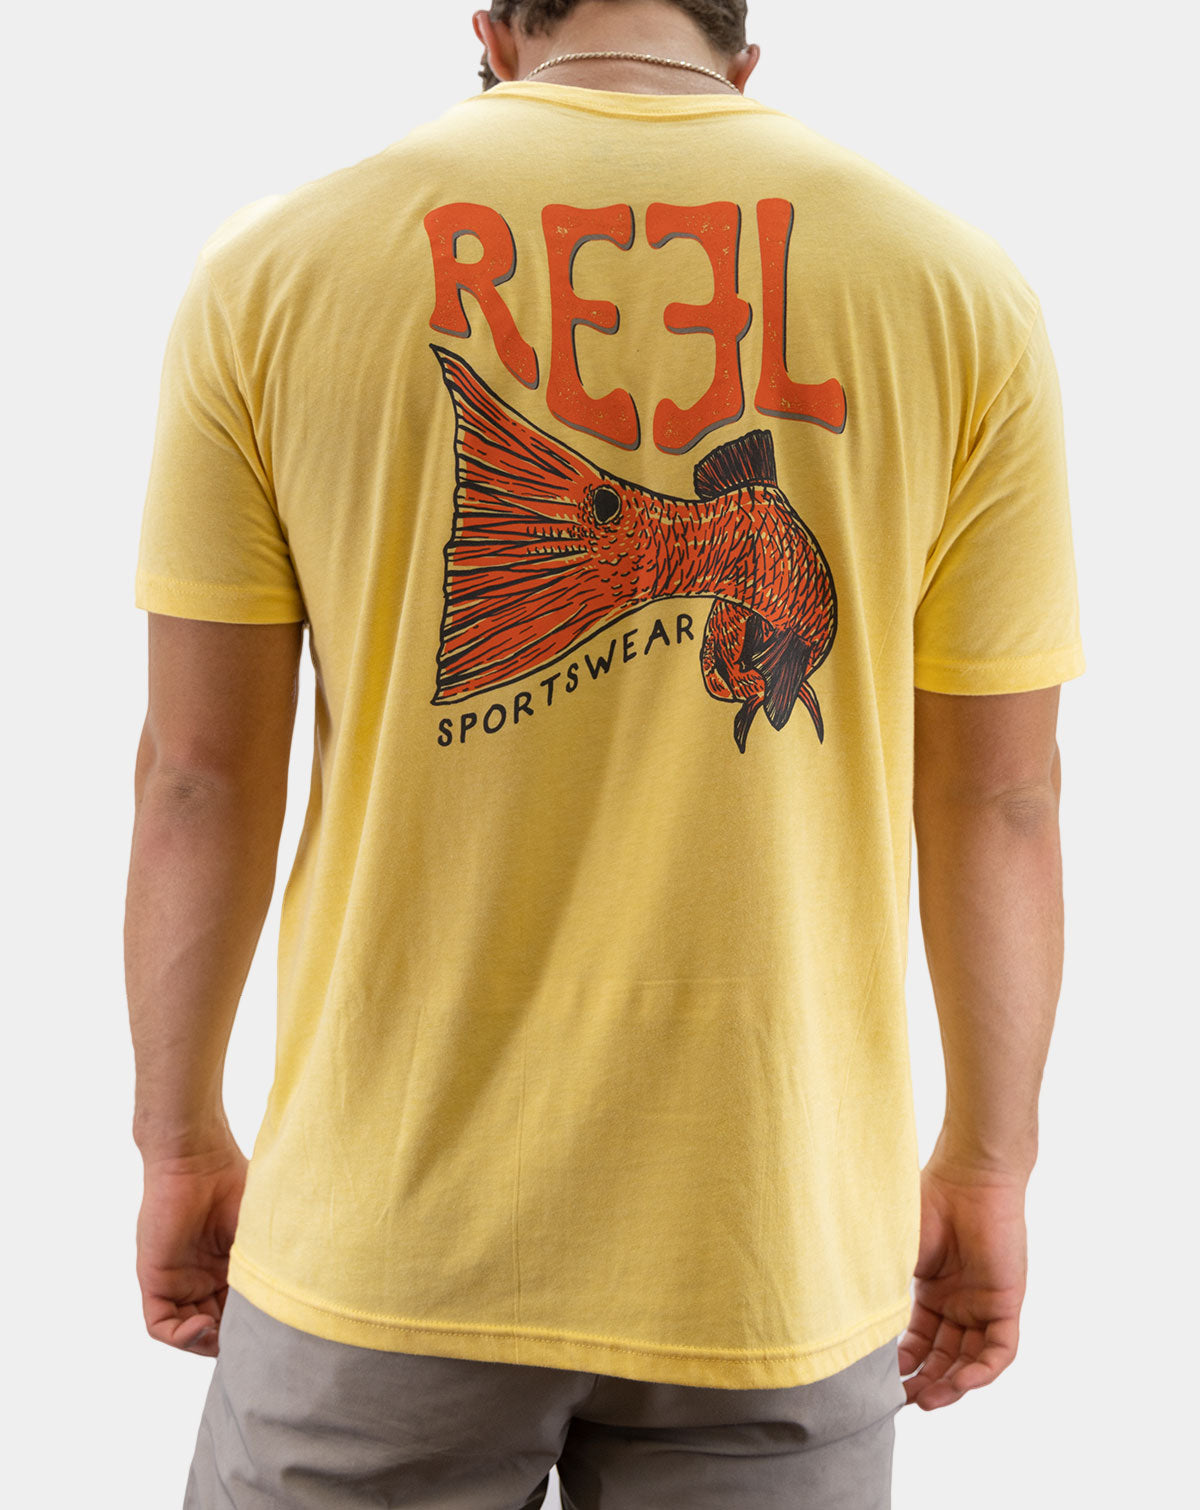 Masculine, Upmarket, Fly Fishing, Fishing. Outdoors. T-shirt Design for a  Company by Al Pech